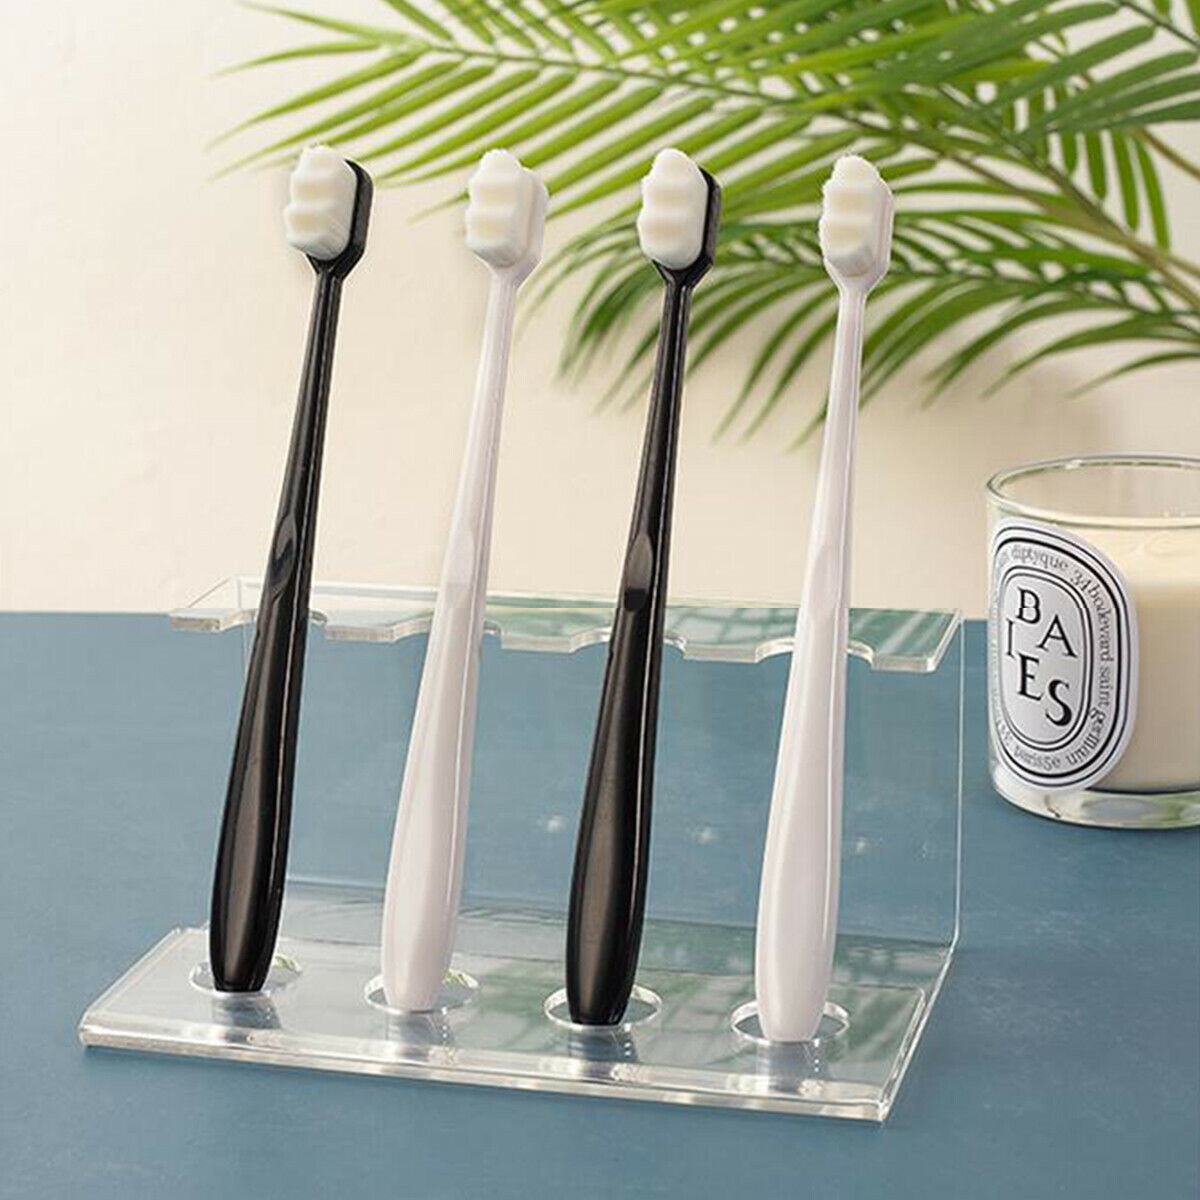 4PCS Nano Ultra-fine Toothbrush Soft Bristle Oral Care Clean for Adult Children